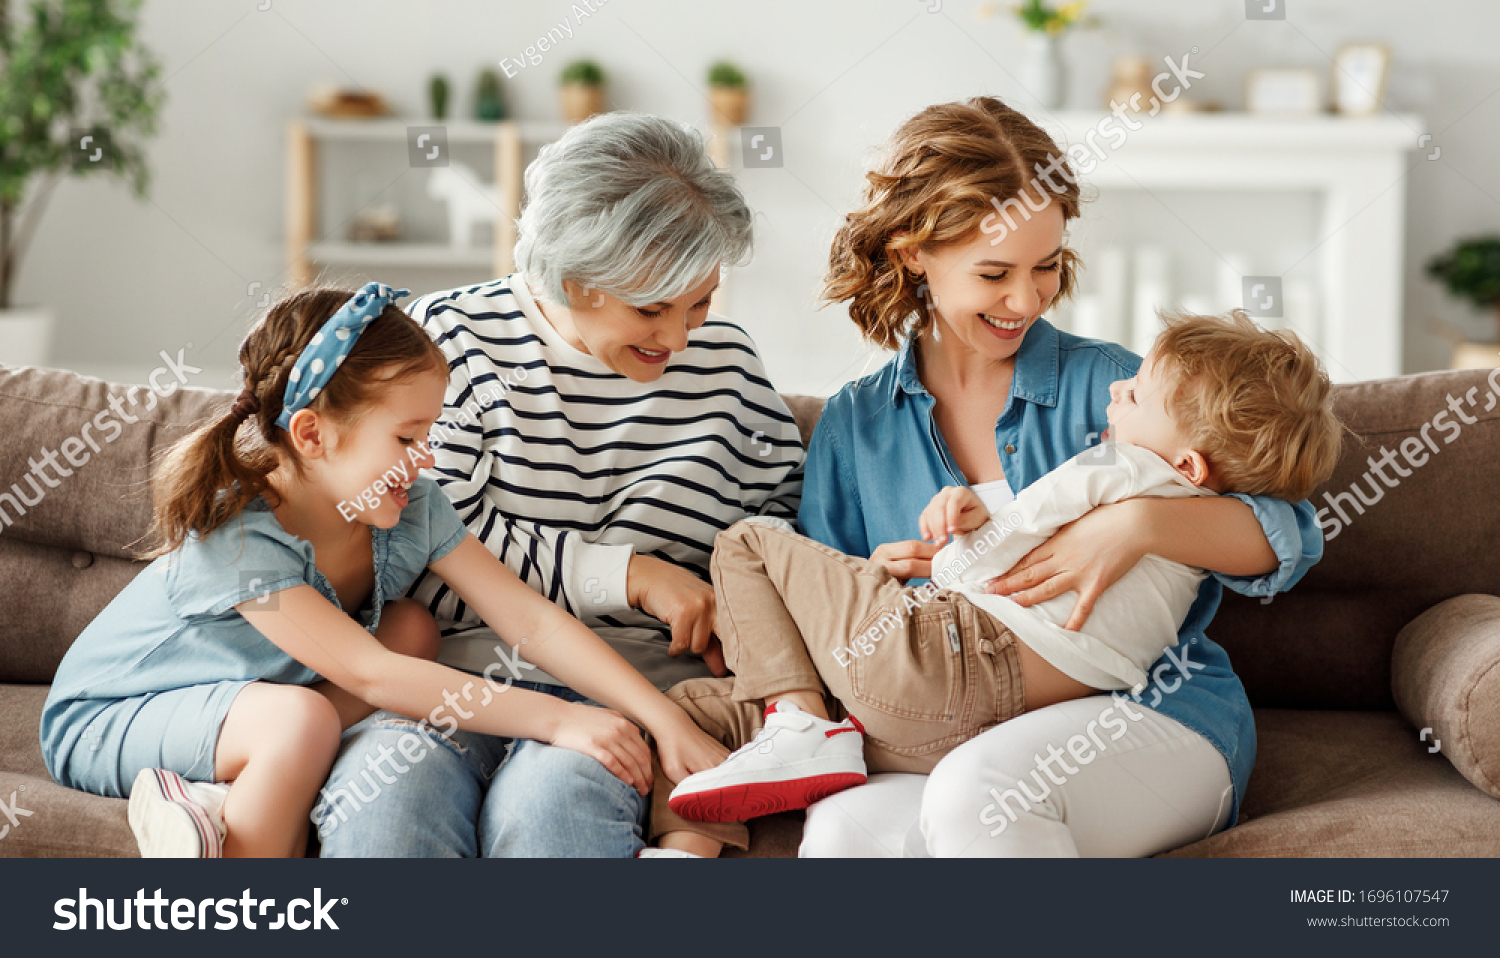 Grandmother and mother hugging and tickling laughing boy while sitting on couch and playing with children on weekend day at home
 #1696107547